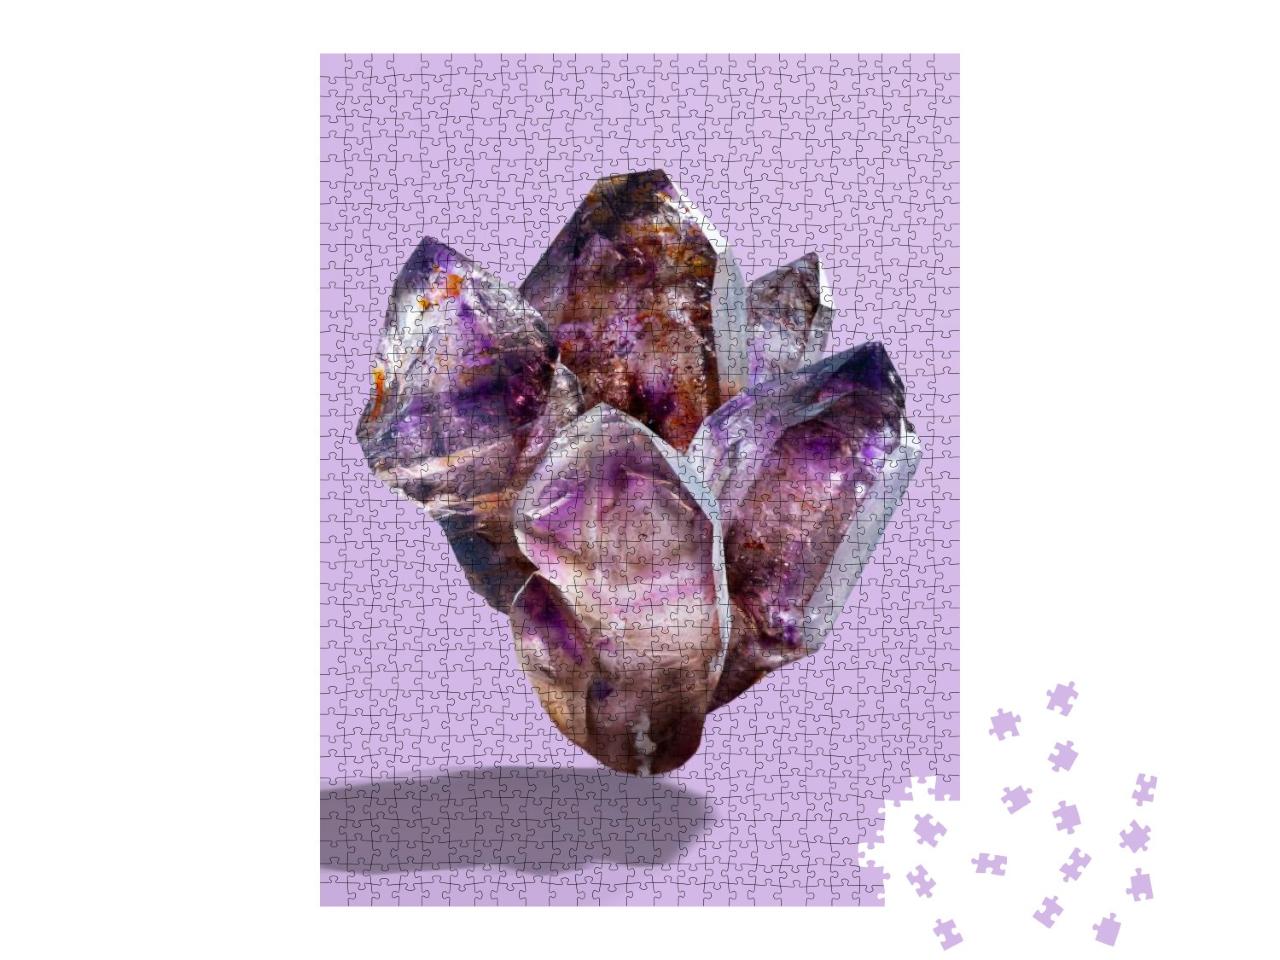 Amethyst Mineral Specimen Stone Rock Geology Gem Crystal... Jigsaw Puzzle with 1000 pieces